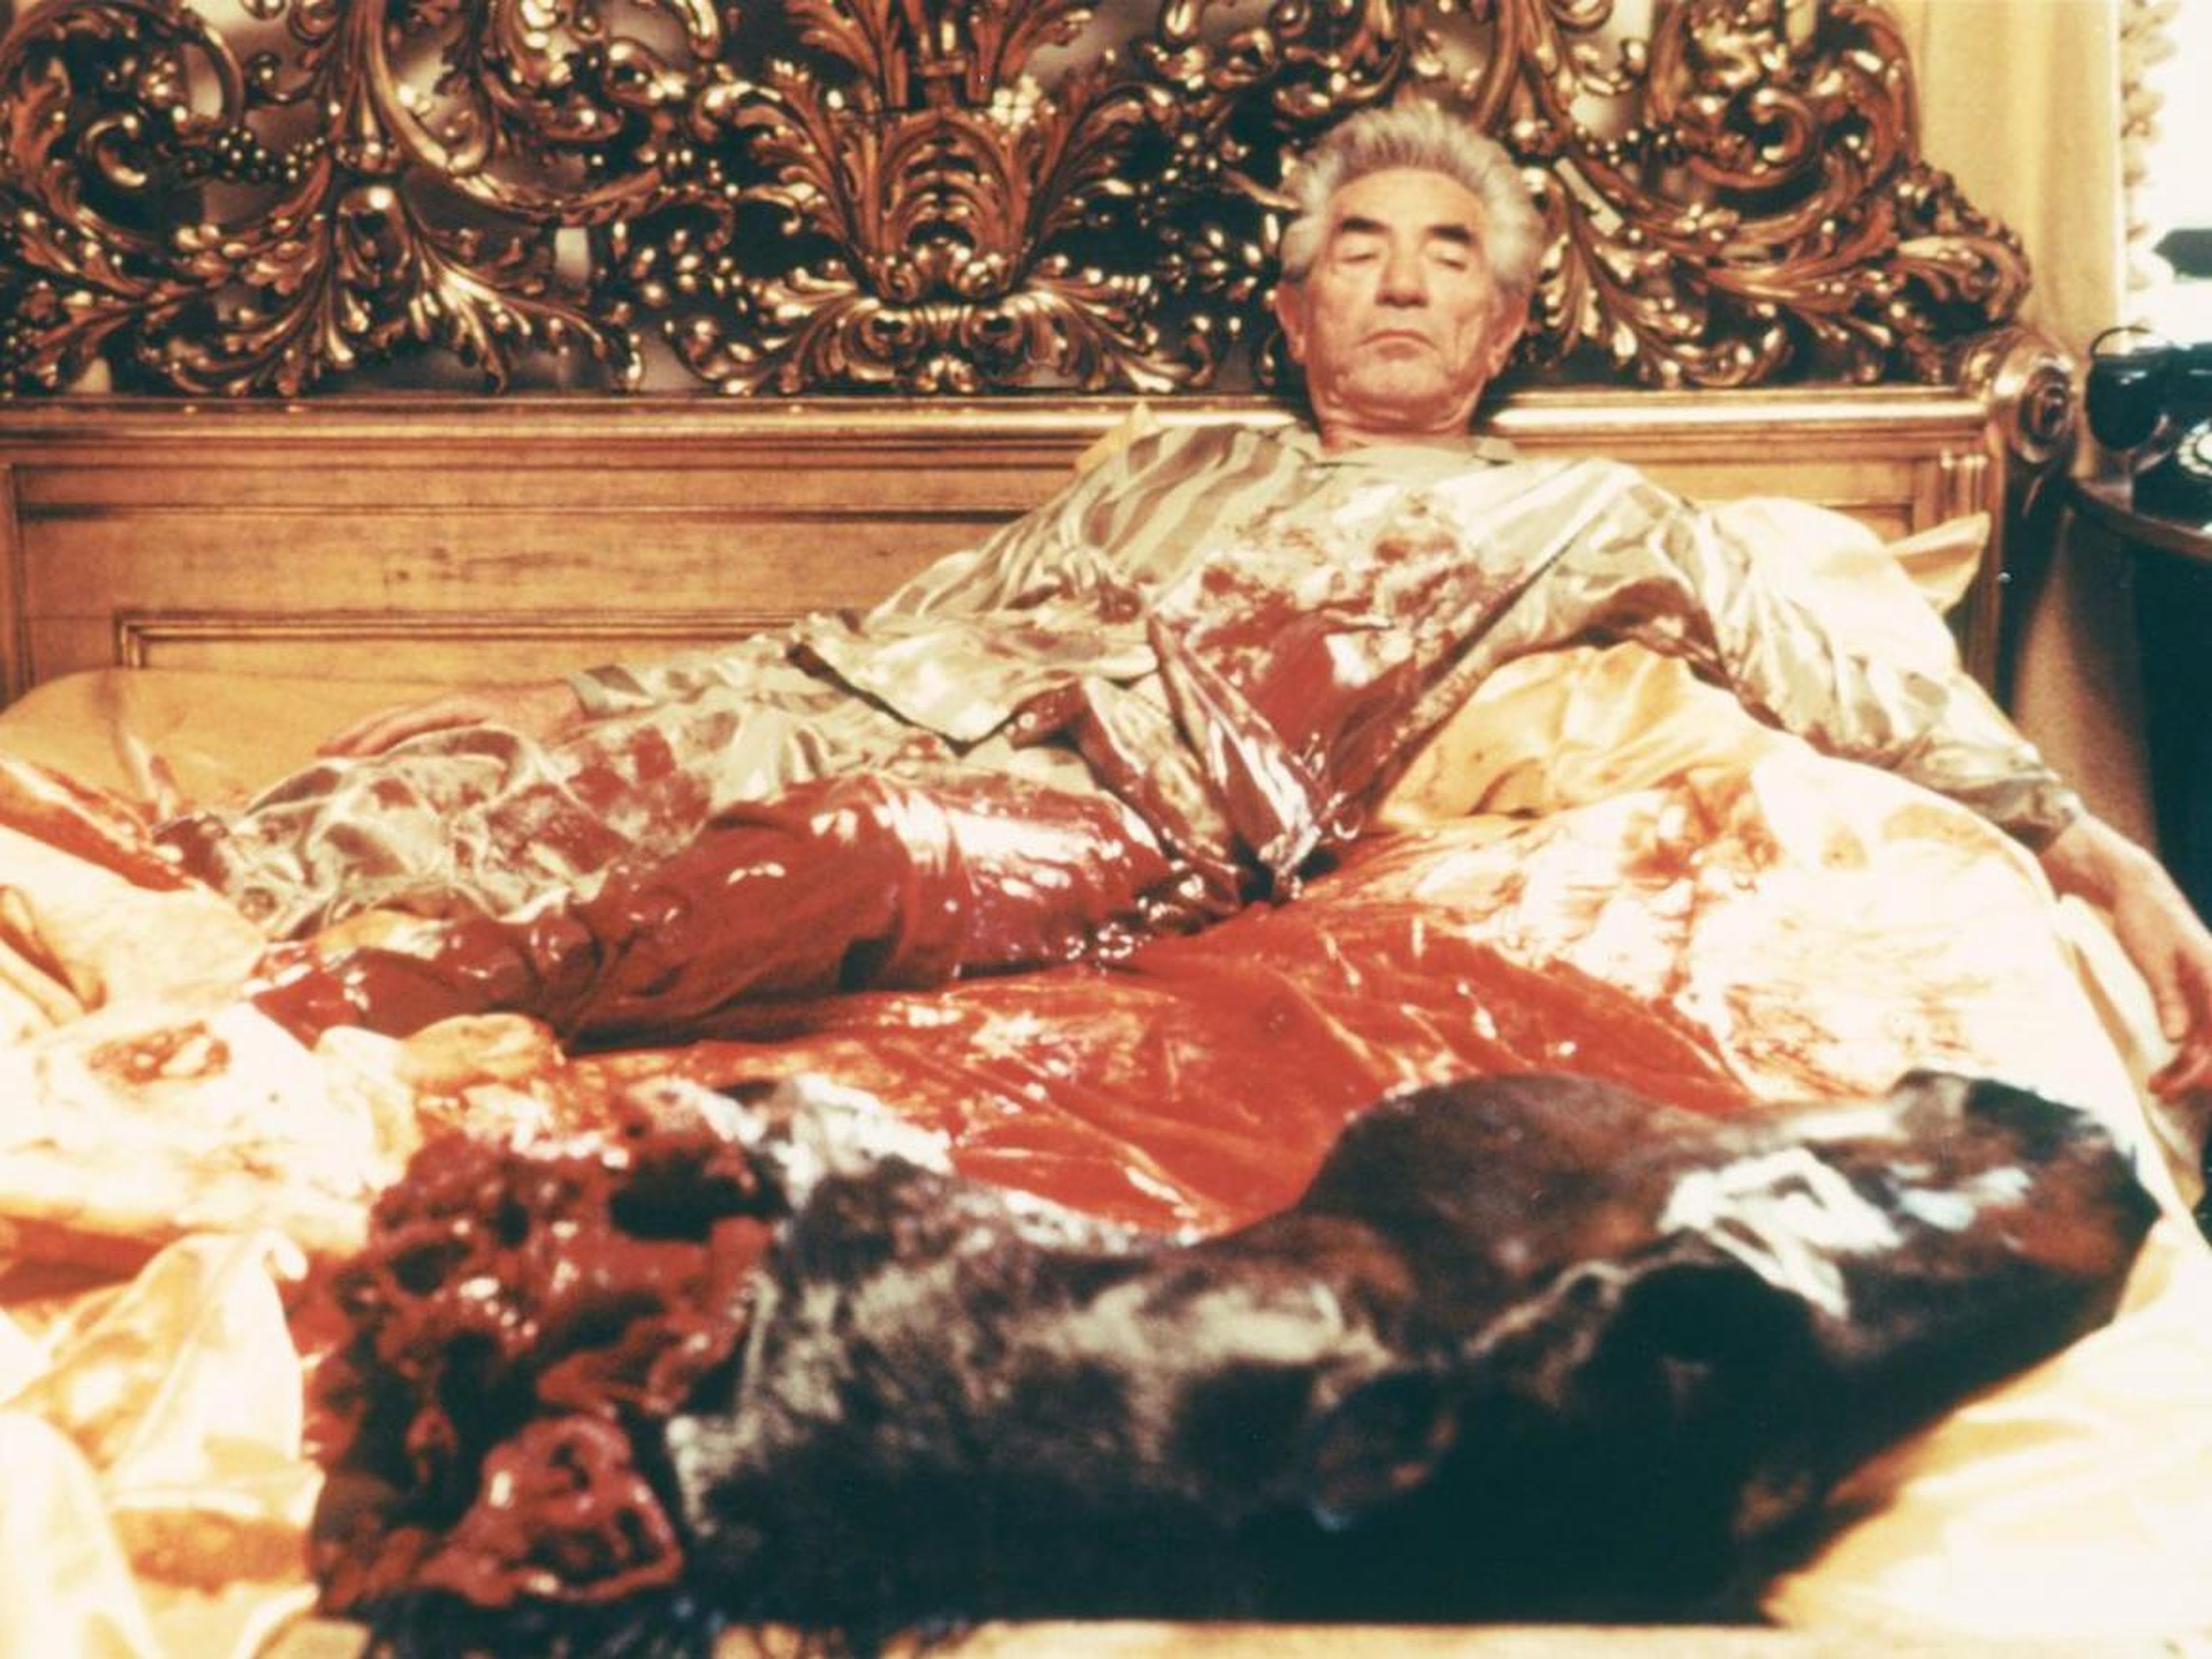 It was the setting for one of the movie's most iconic scenes, in which Woltz wakes up to a bloody, severed horse head in his bed.